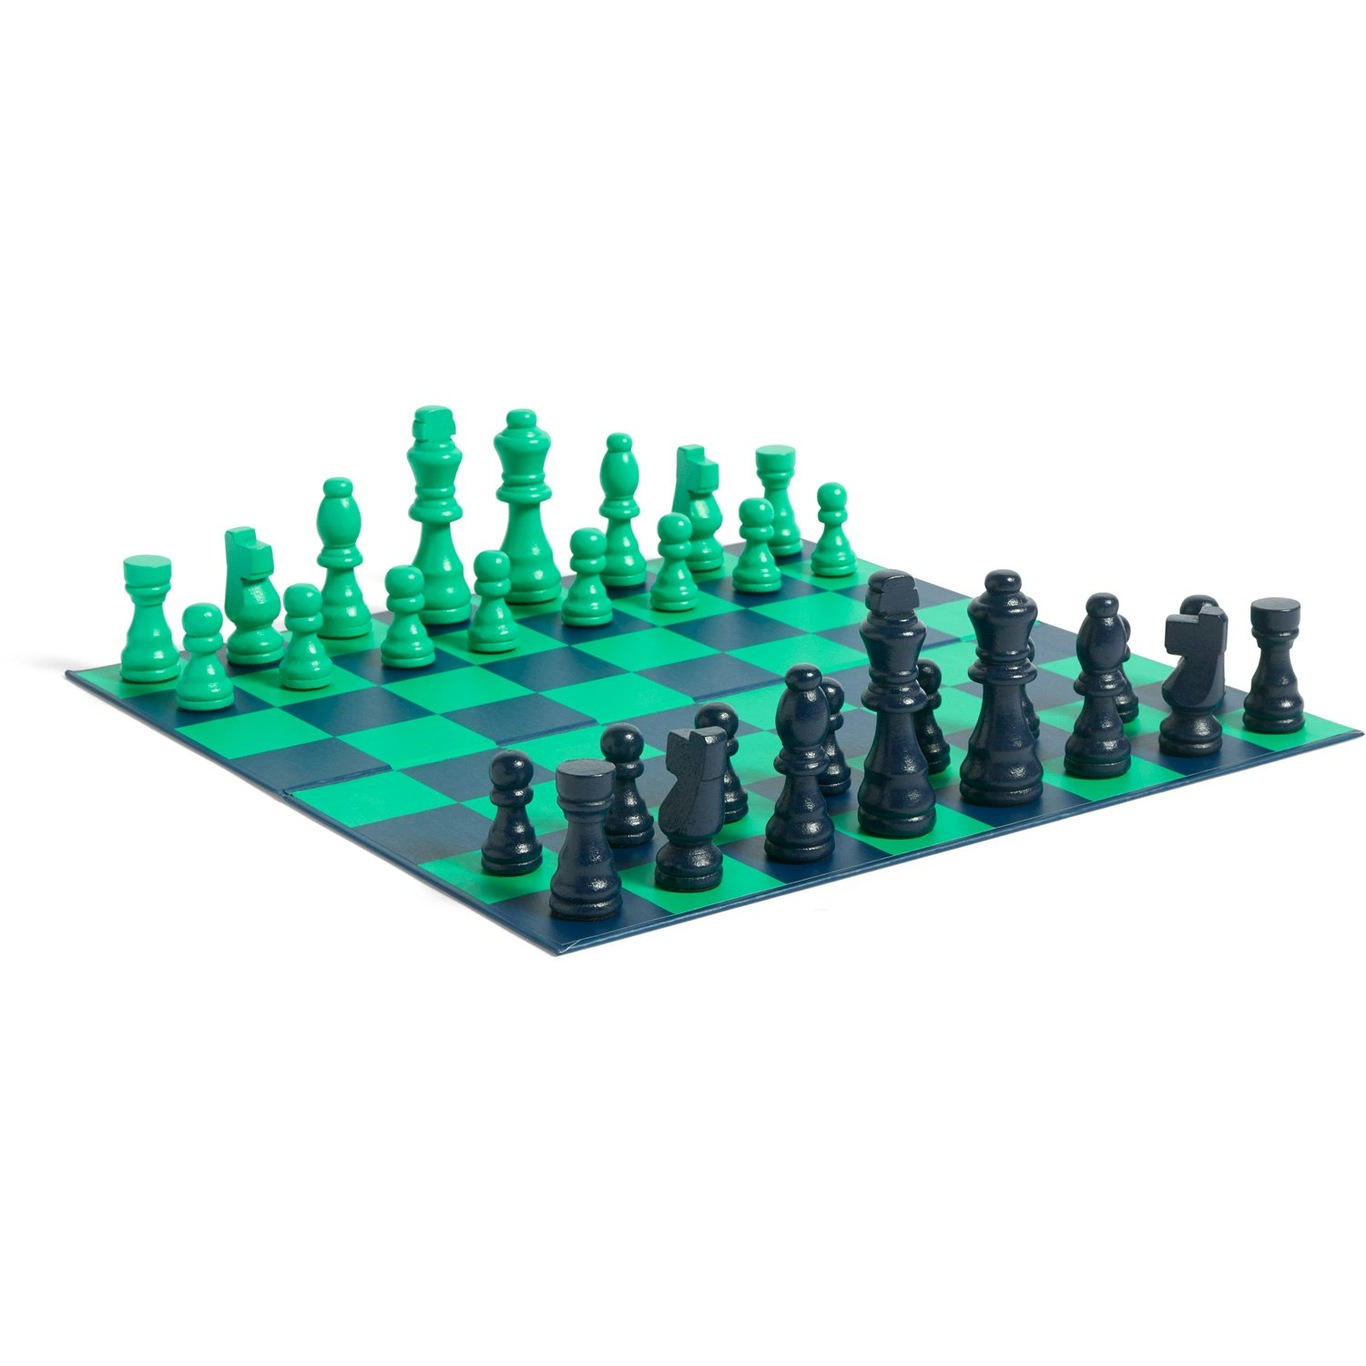 PLAY Chess Game, Green